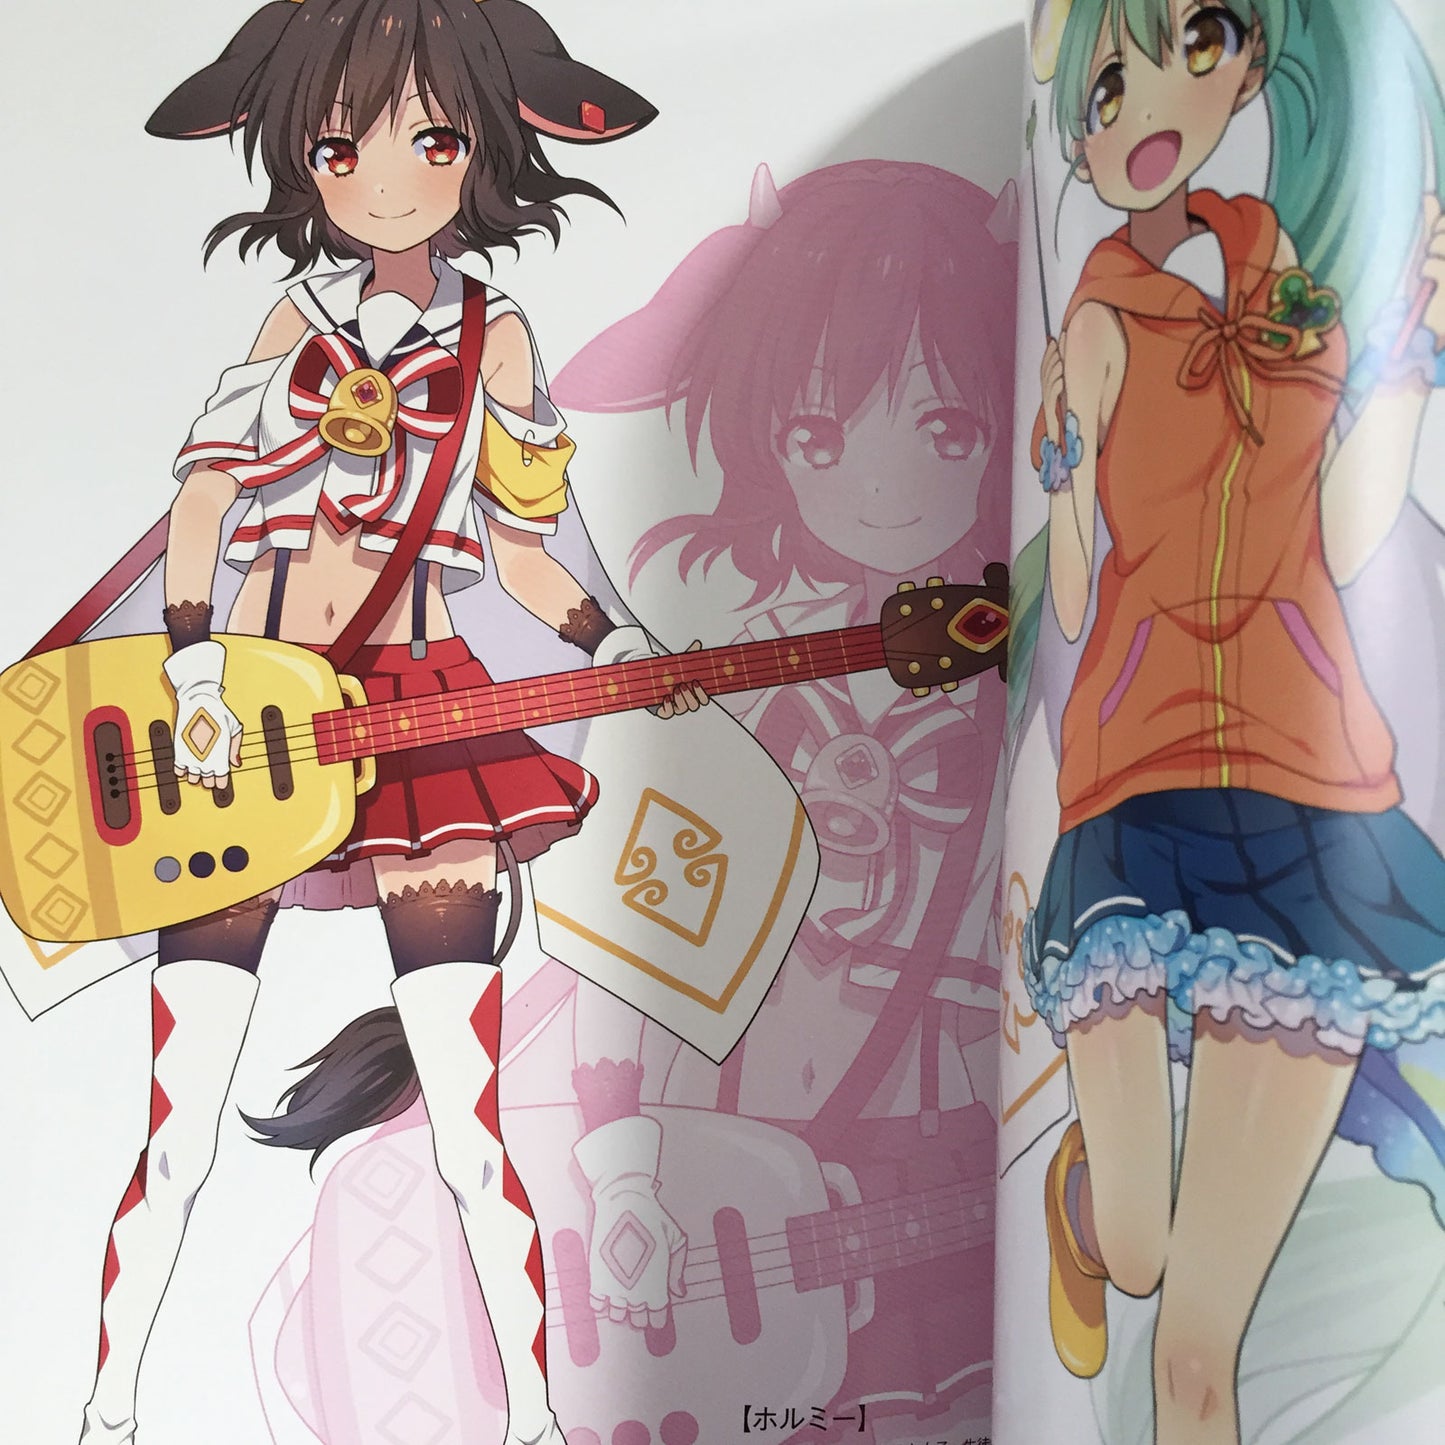 SHOW BY ROCK!! OFFICIAL ART BOOK